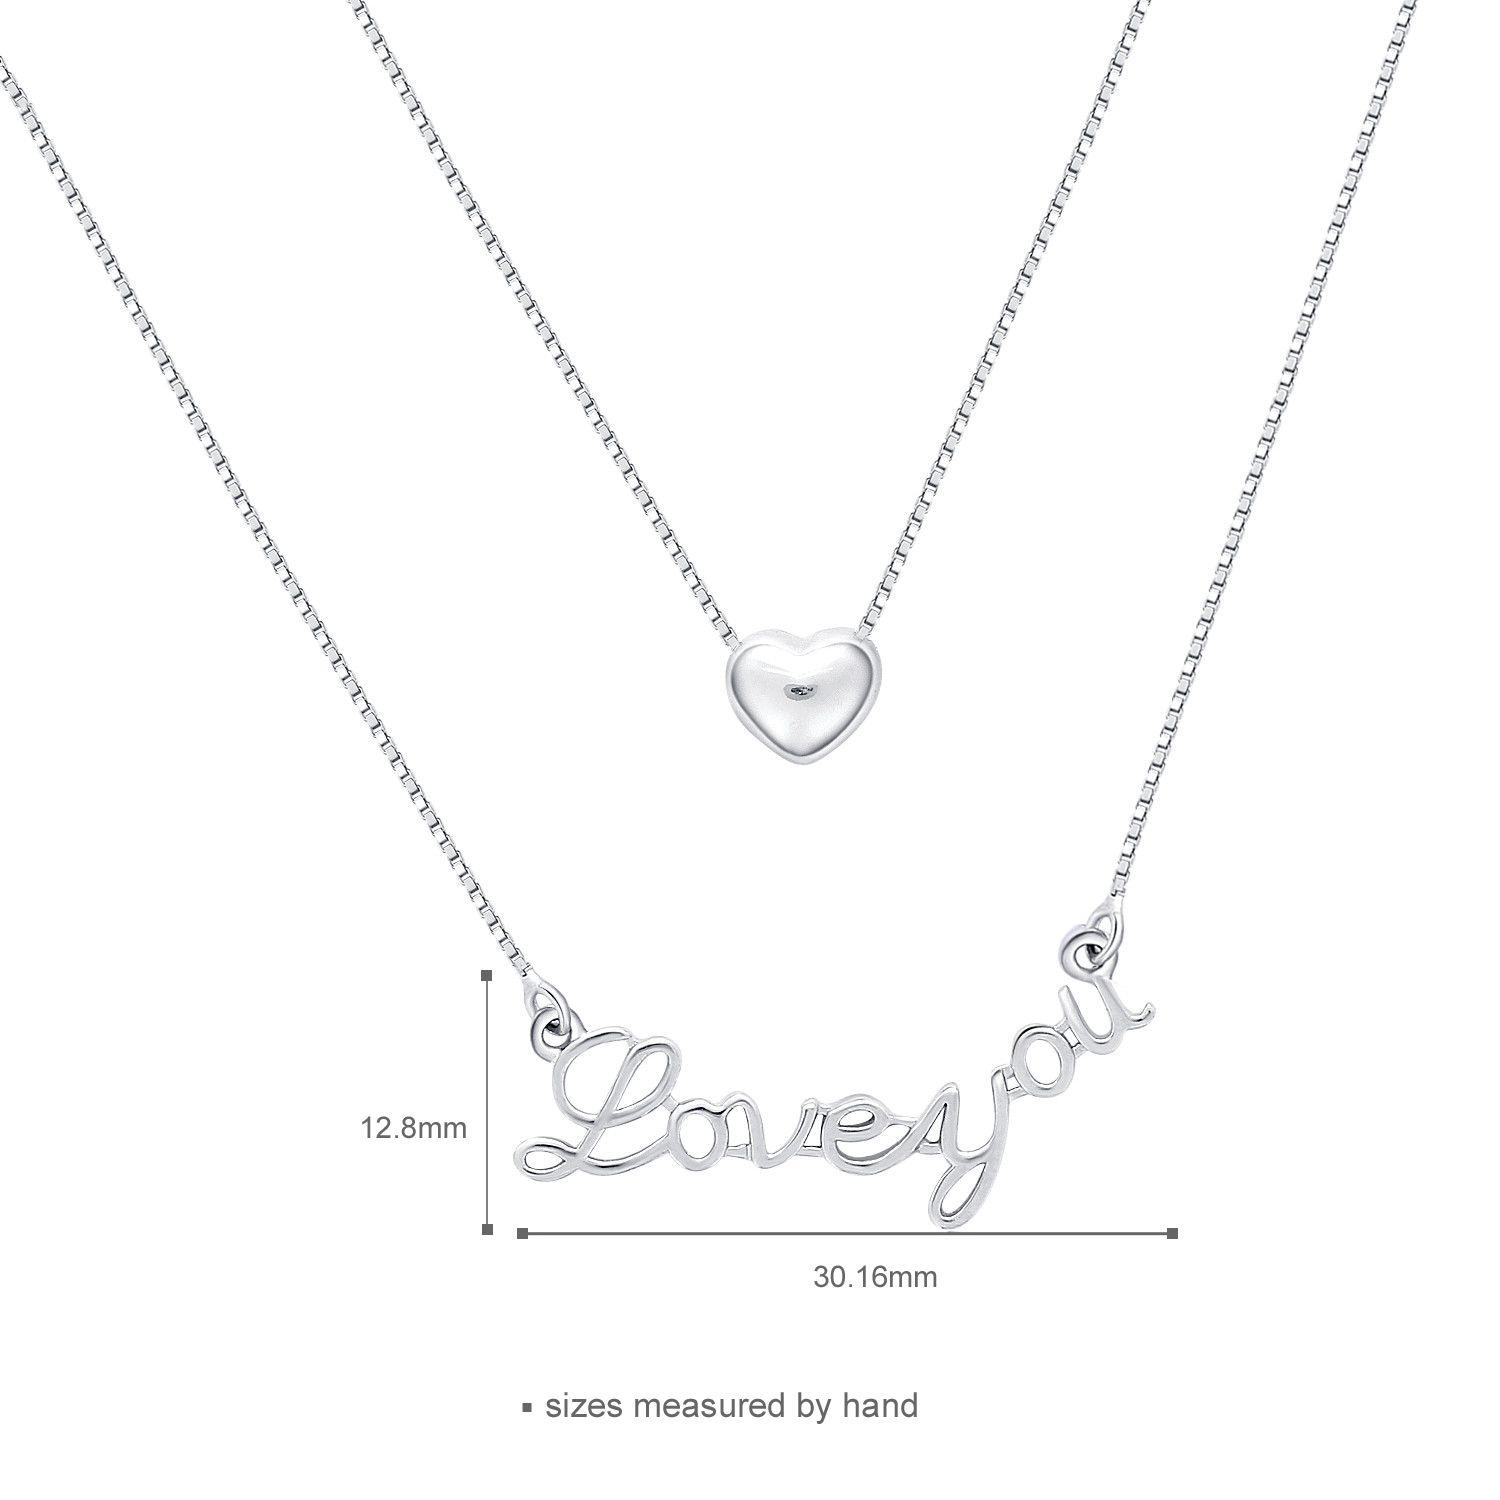 925 sterling silver personalzie pendant necklace chain couple jewelry OEM/ODM welcome necklace chain(图1)